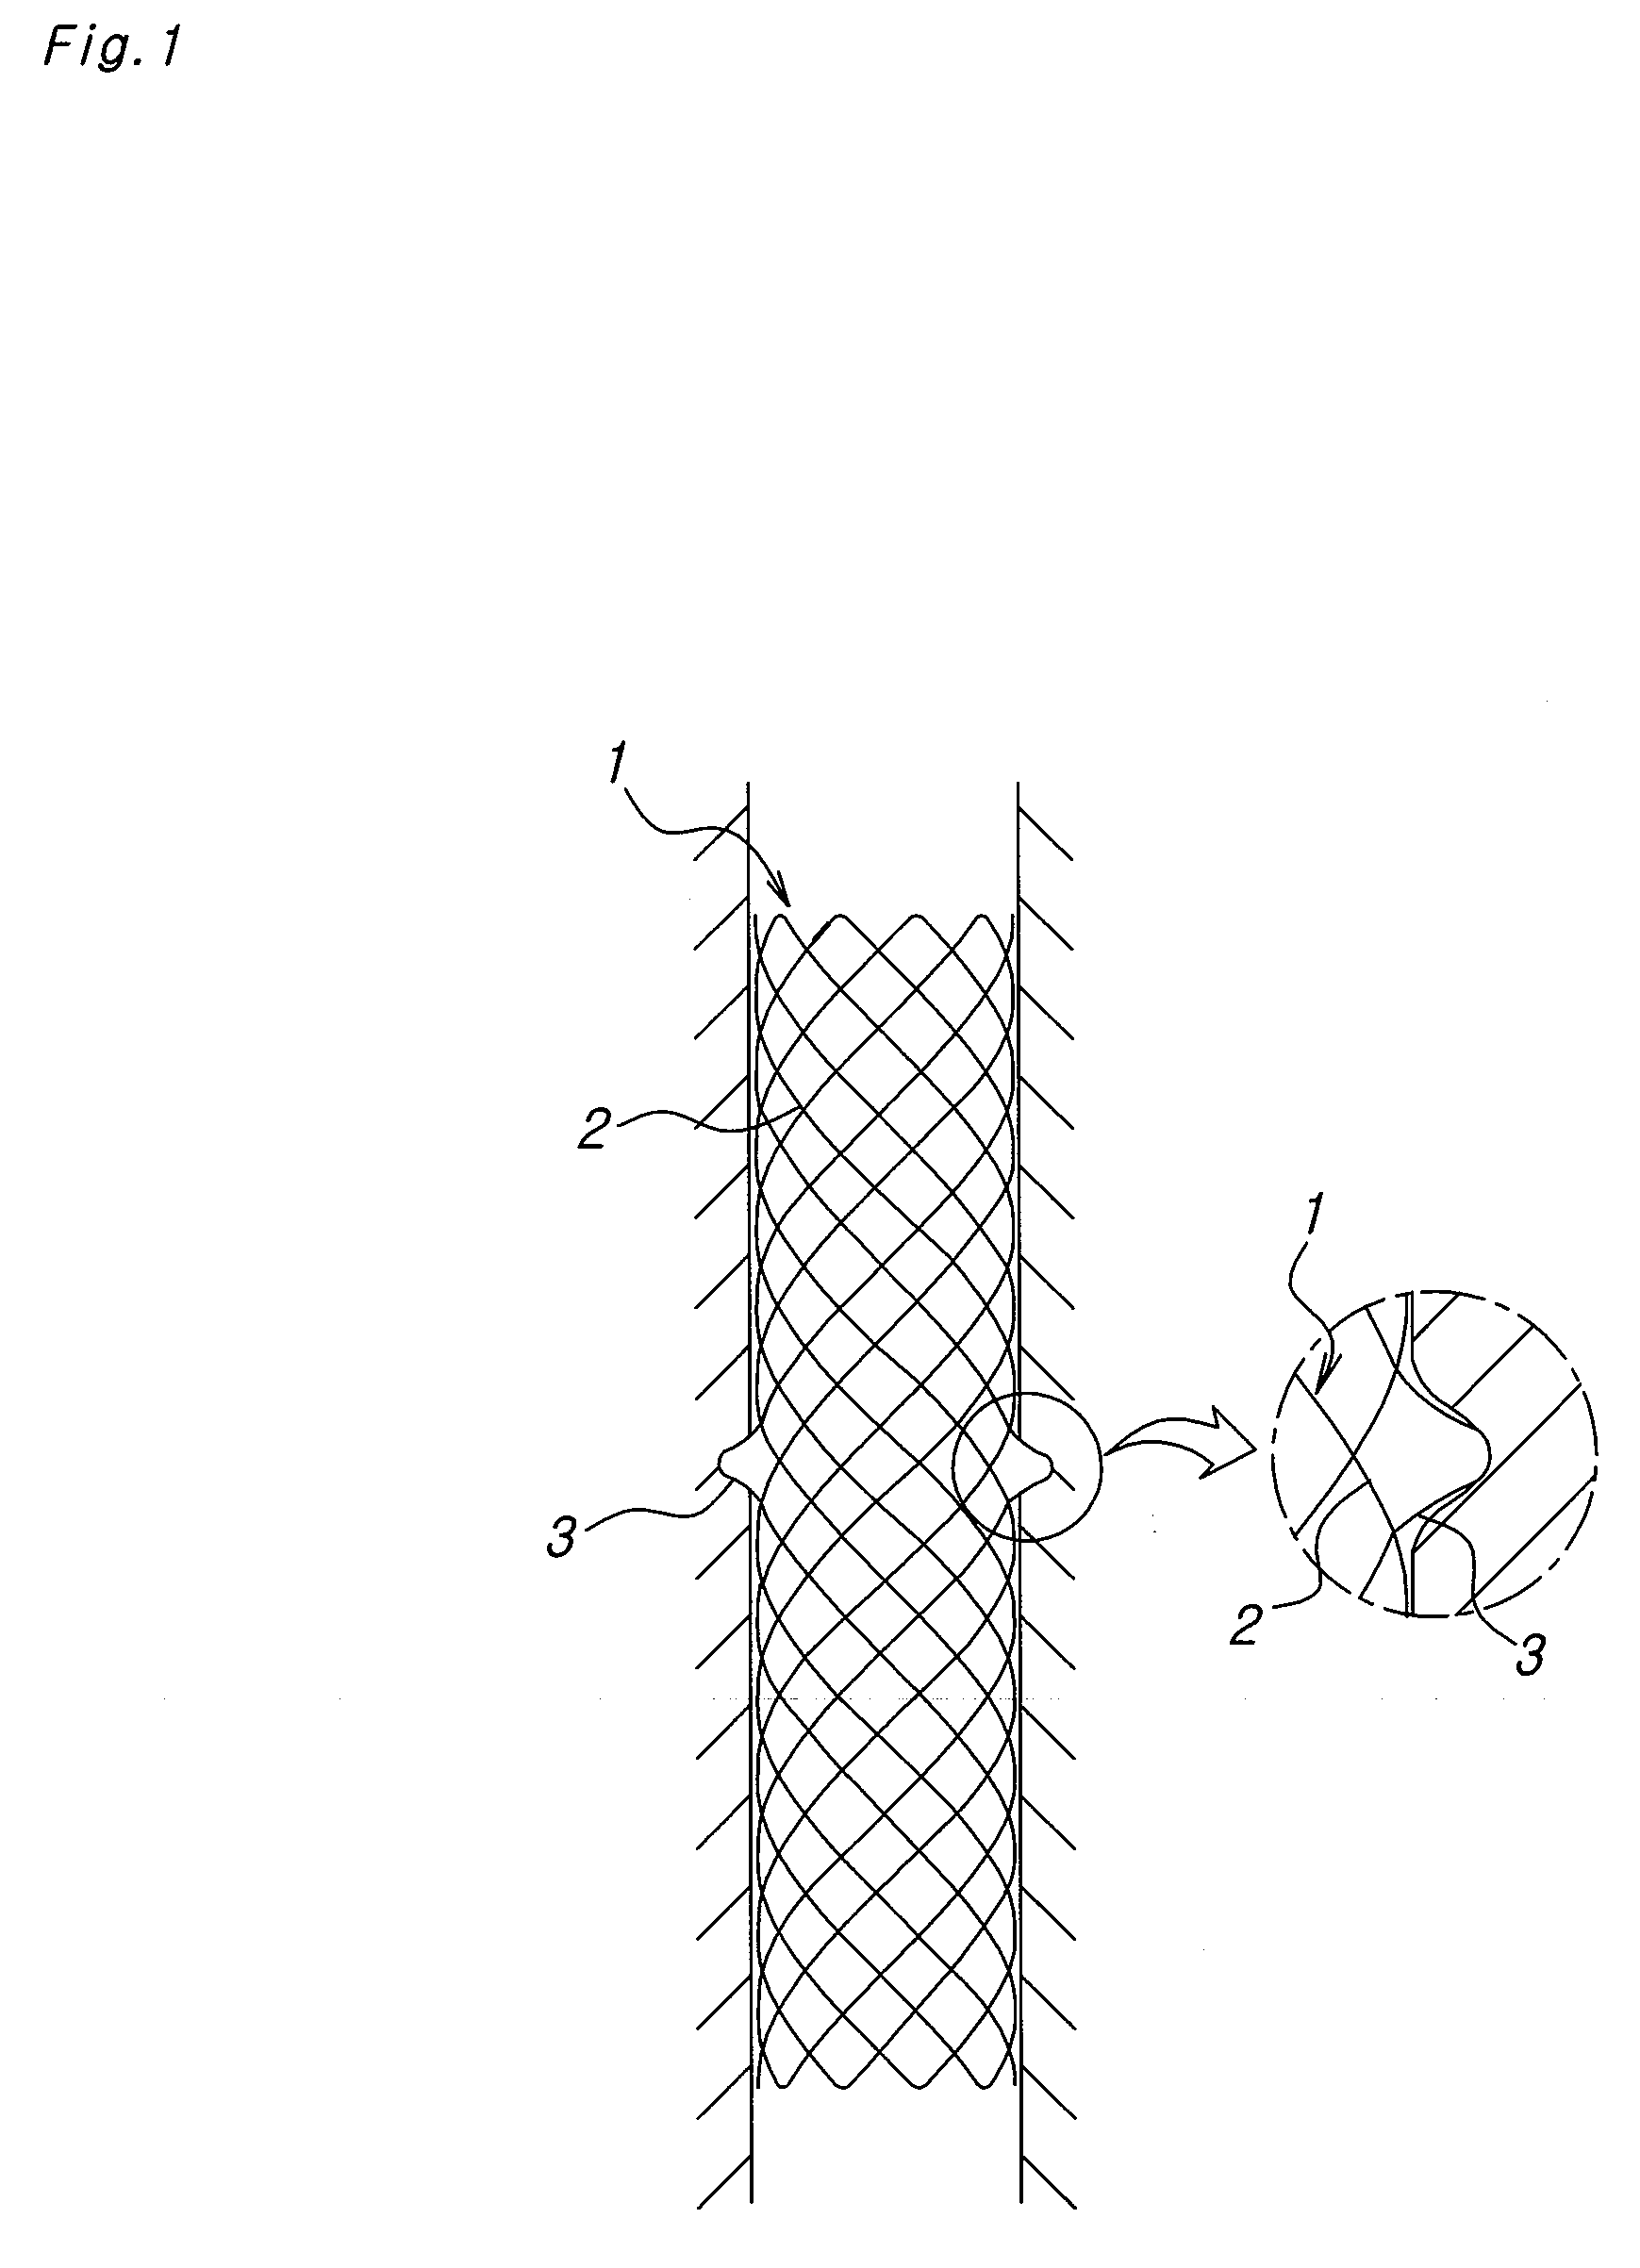 Biodegradable double stent